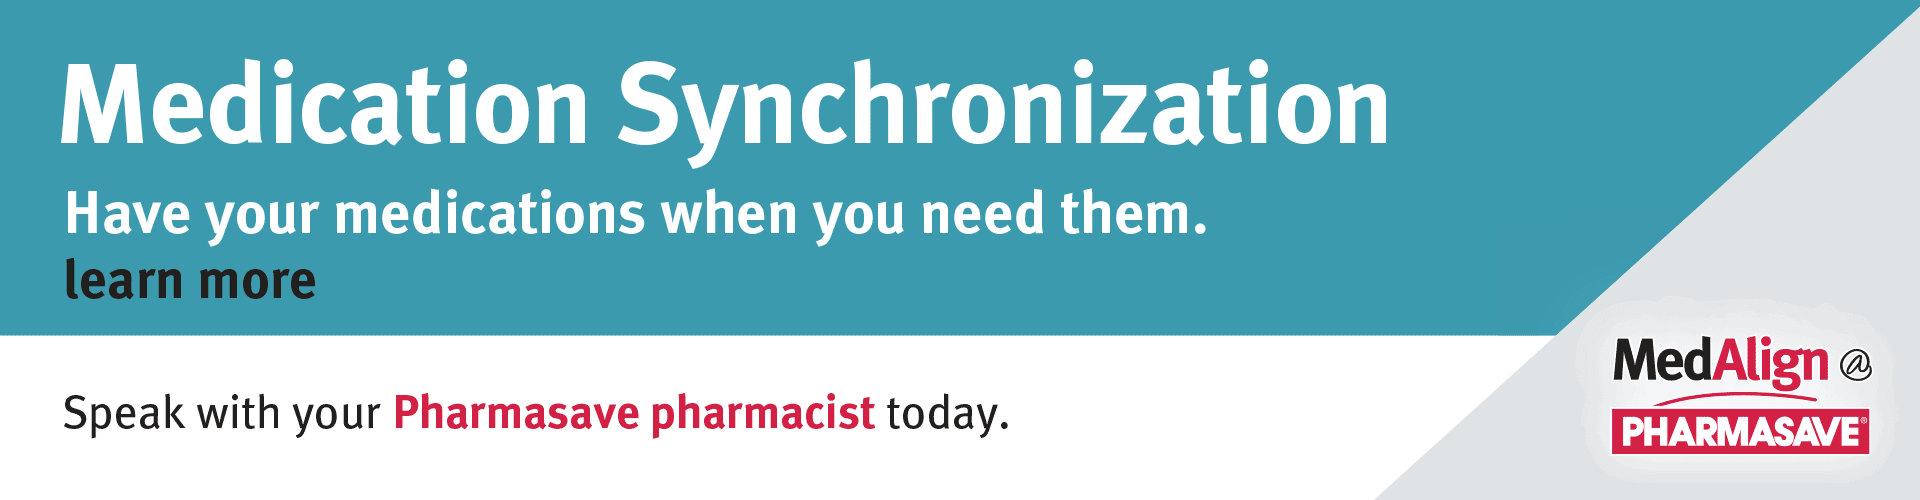 Speak with your Pharmasave pharmacist about Medication Synchronization.